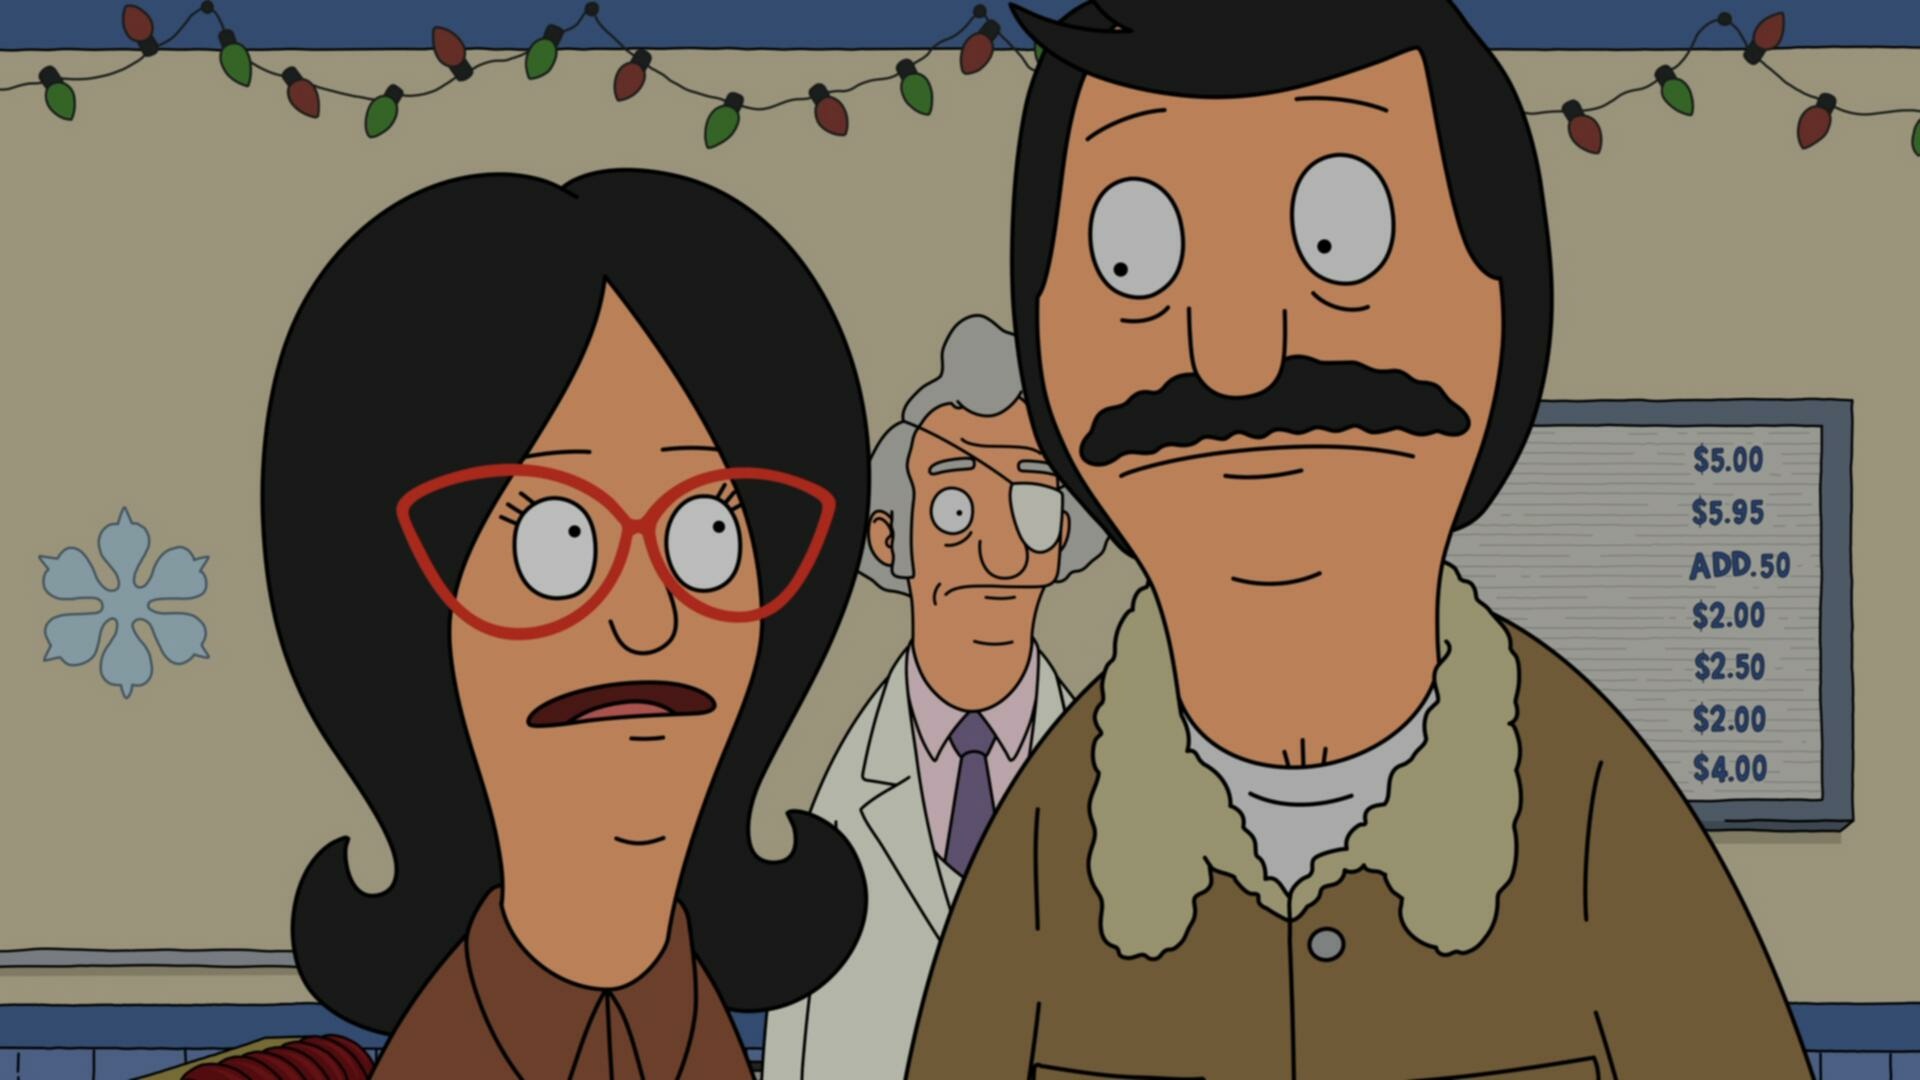 Bobs Burgers S14E10 The Nightmare 2 Days Before Christmas 1080p DSNP WEB DL DDP5 1 H 264 NTb TGx